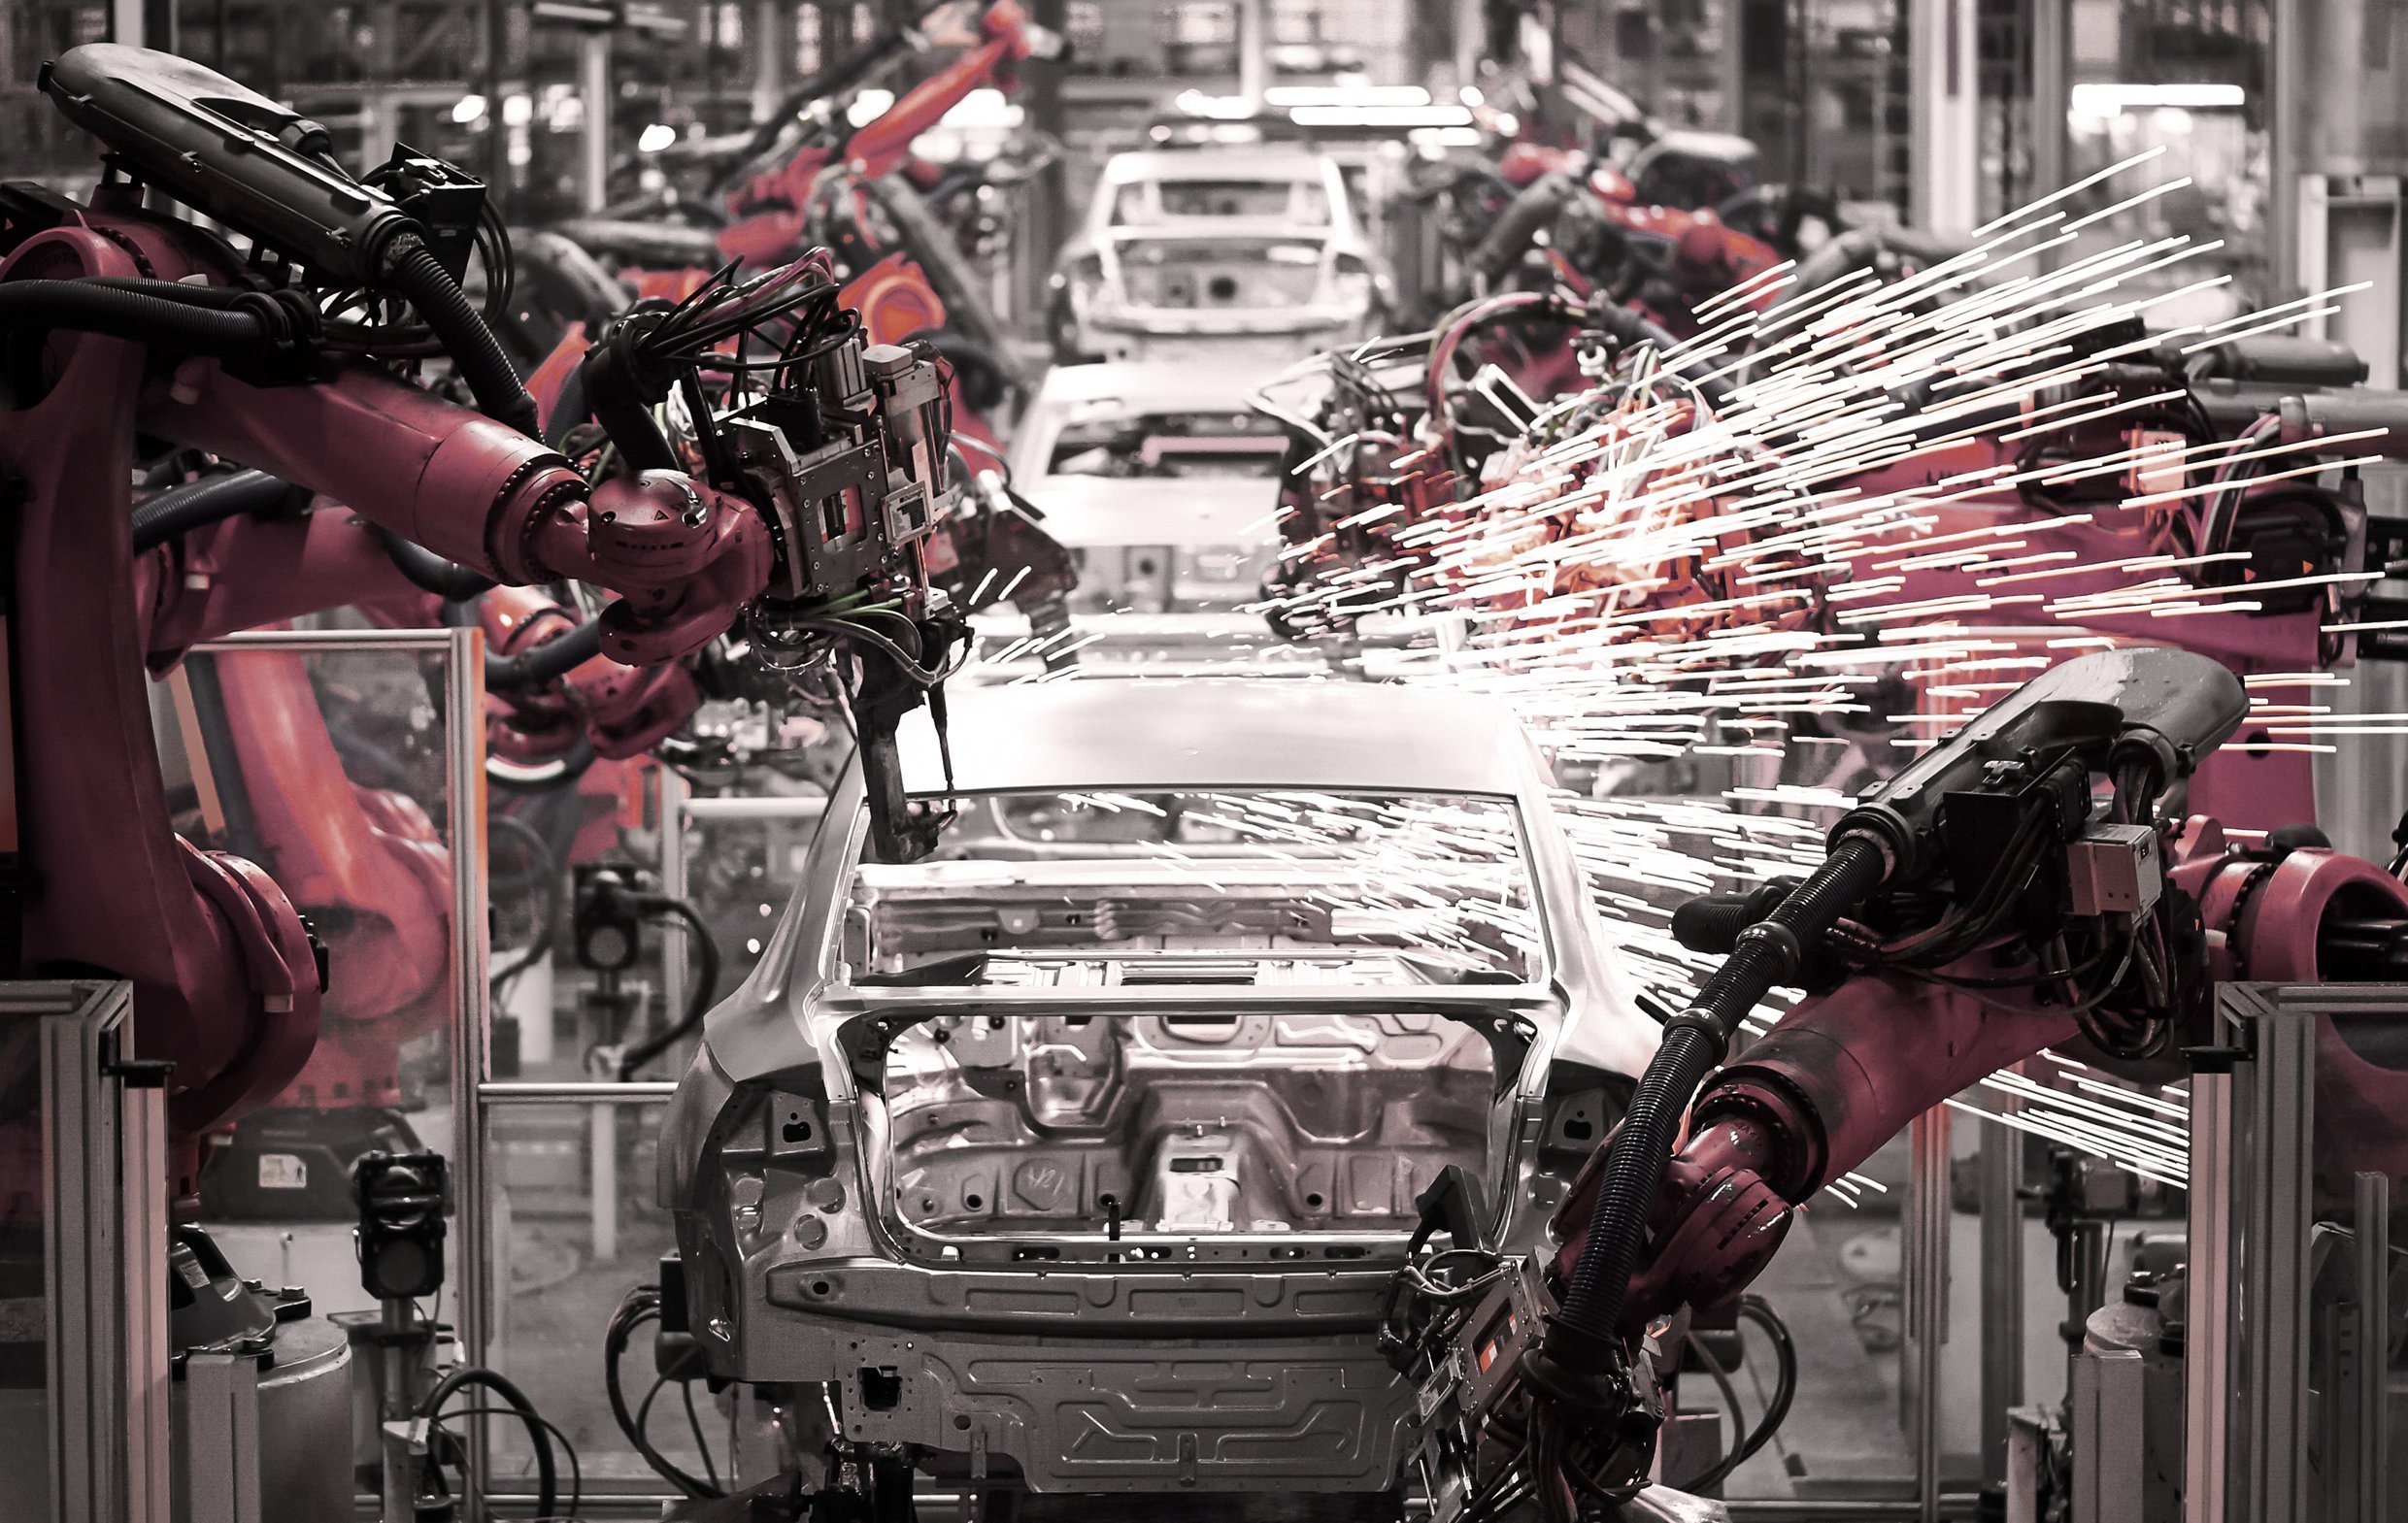 Numerous orange robots working on car chassis in an industrial production line. One robot is welding on a car creating a burst of sparks.